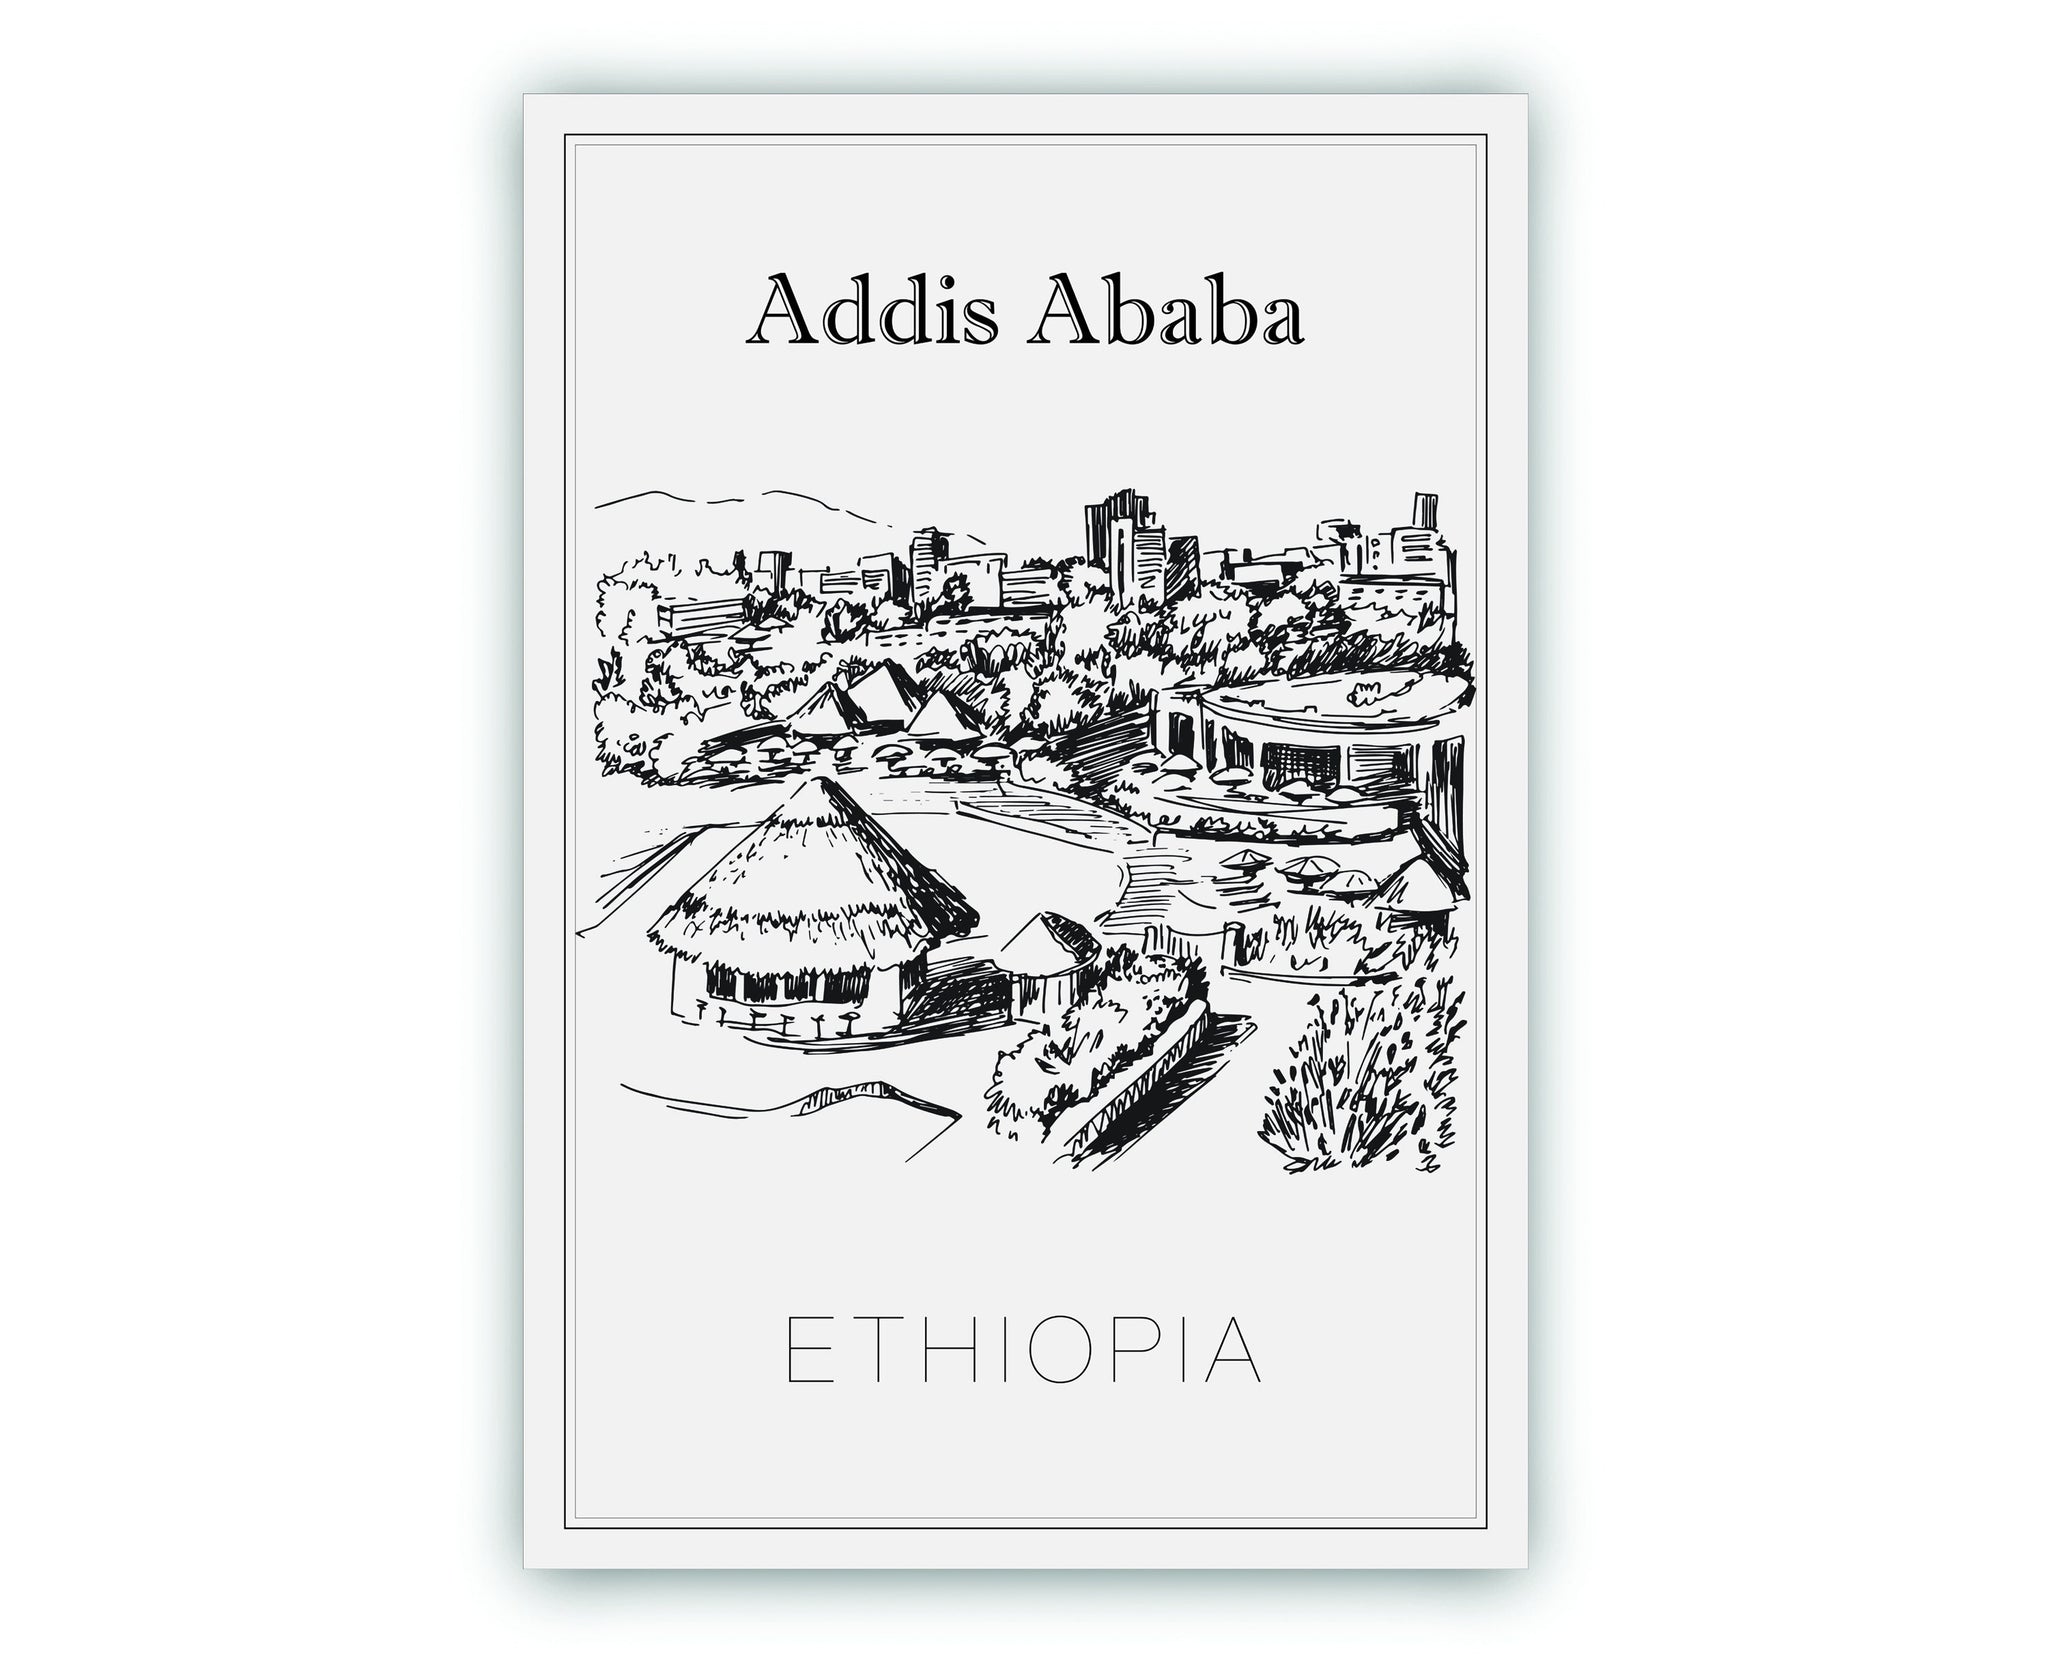 Hand Drawn Poster, Addis Ababa Travel Poster, Ethiopia Poster Wall Art, Addis Ababa Cityscape and Landmark Map, City Poster For Home